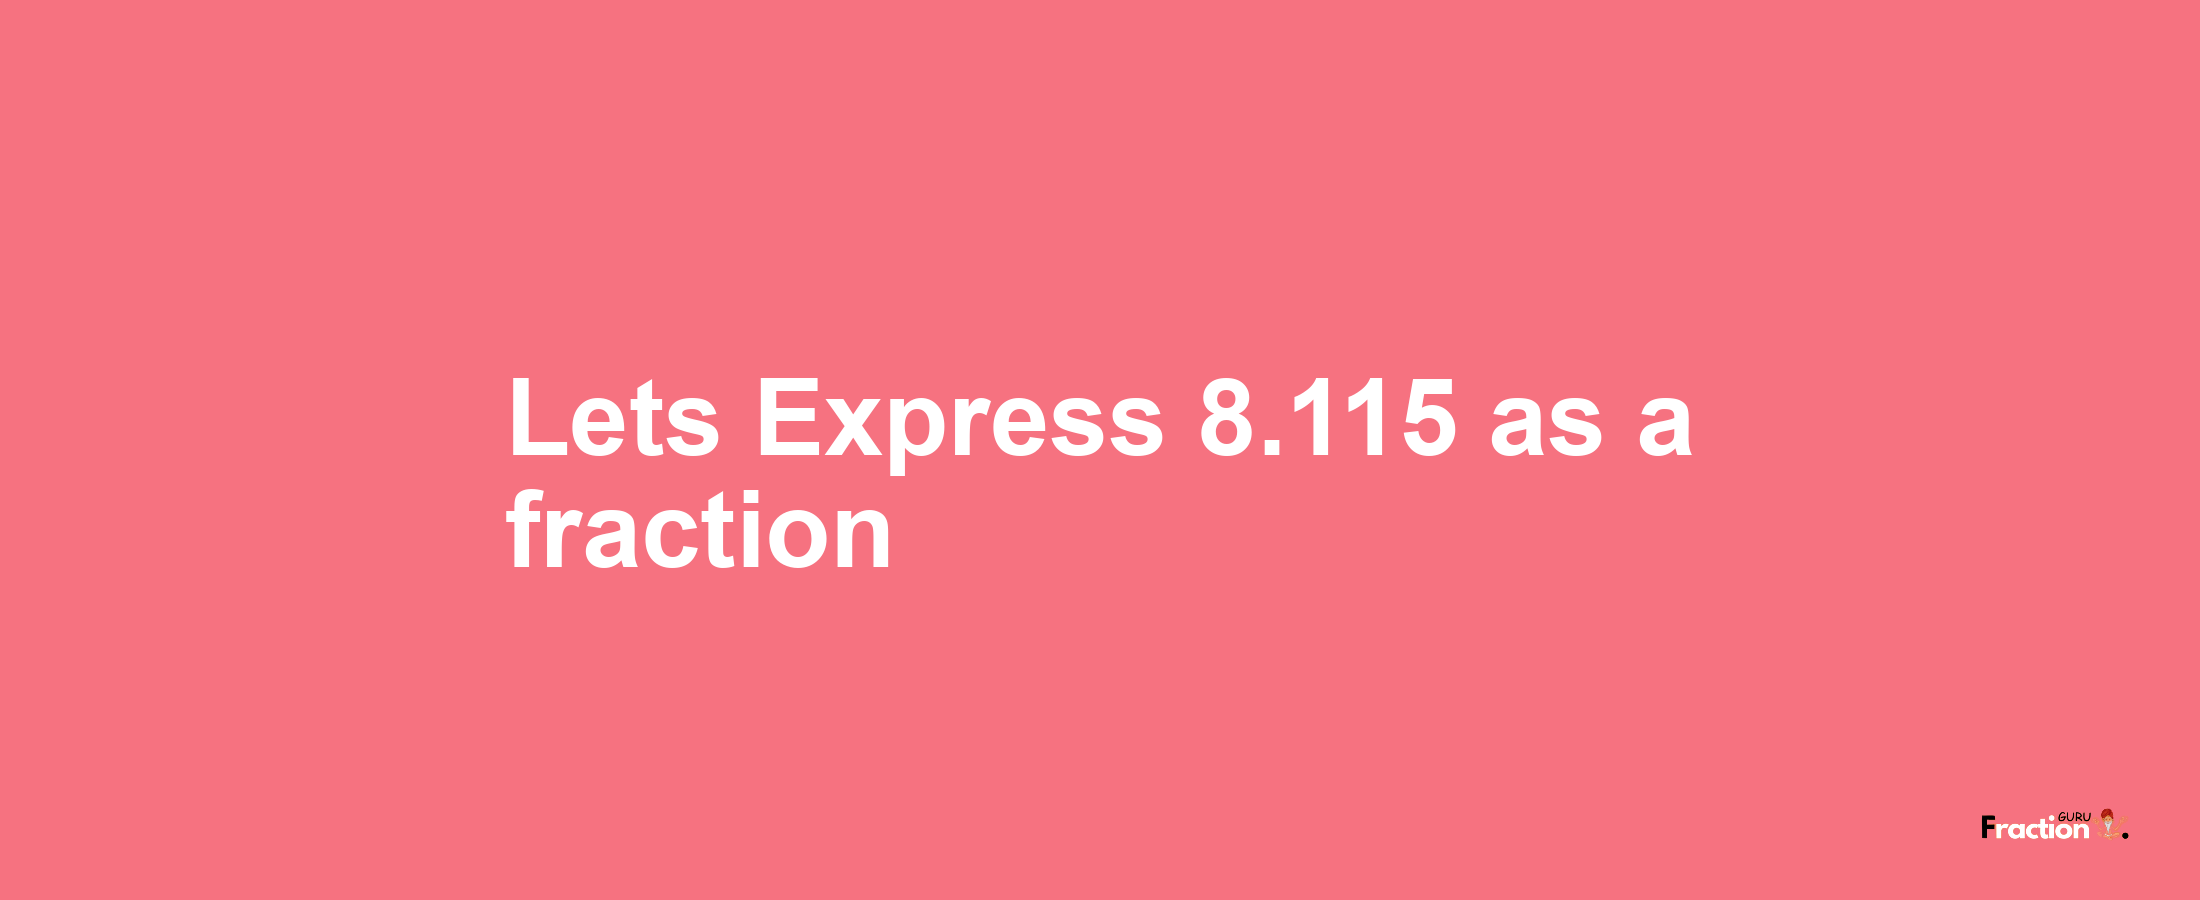 Lets Express 8.115 as afraction